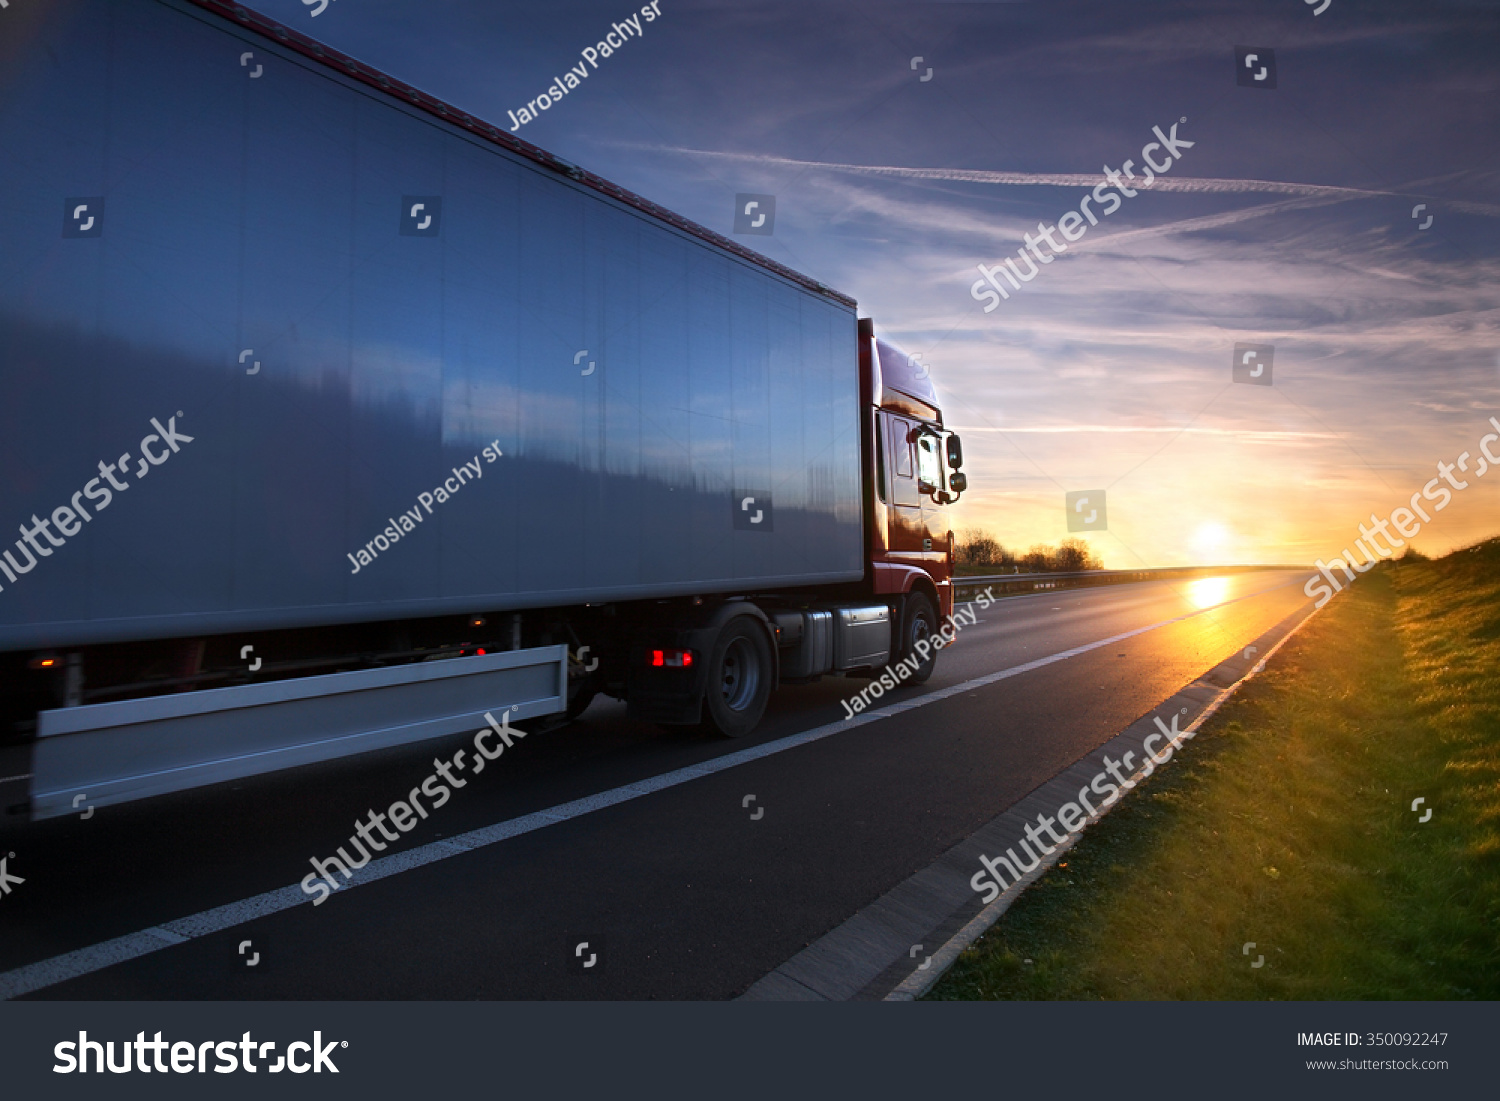 Truck transportation on the road at sunset #350092247